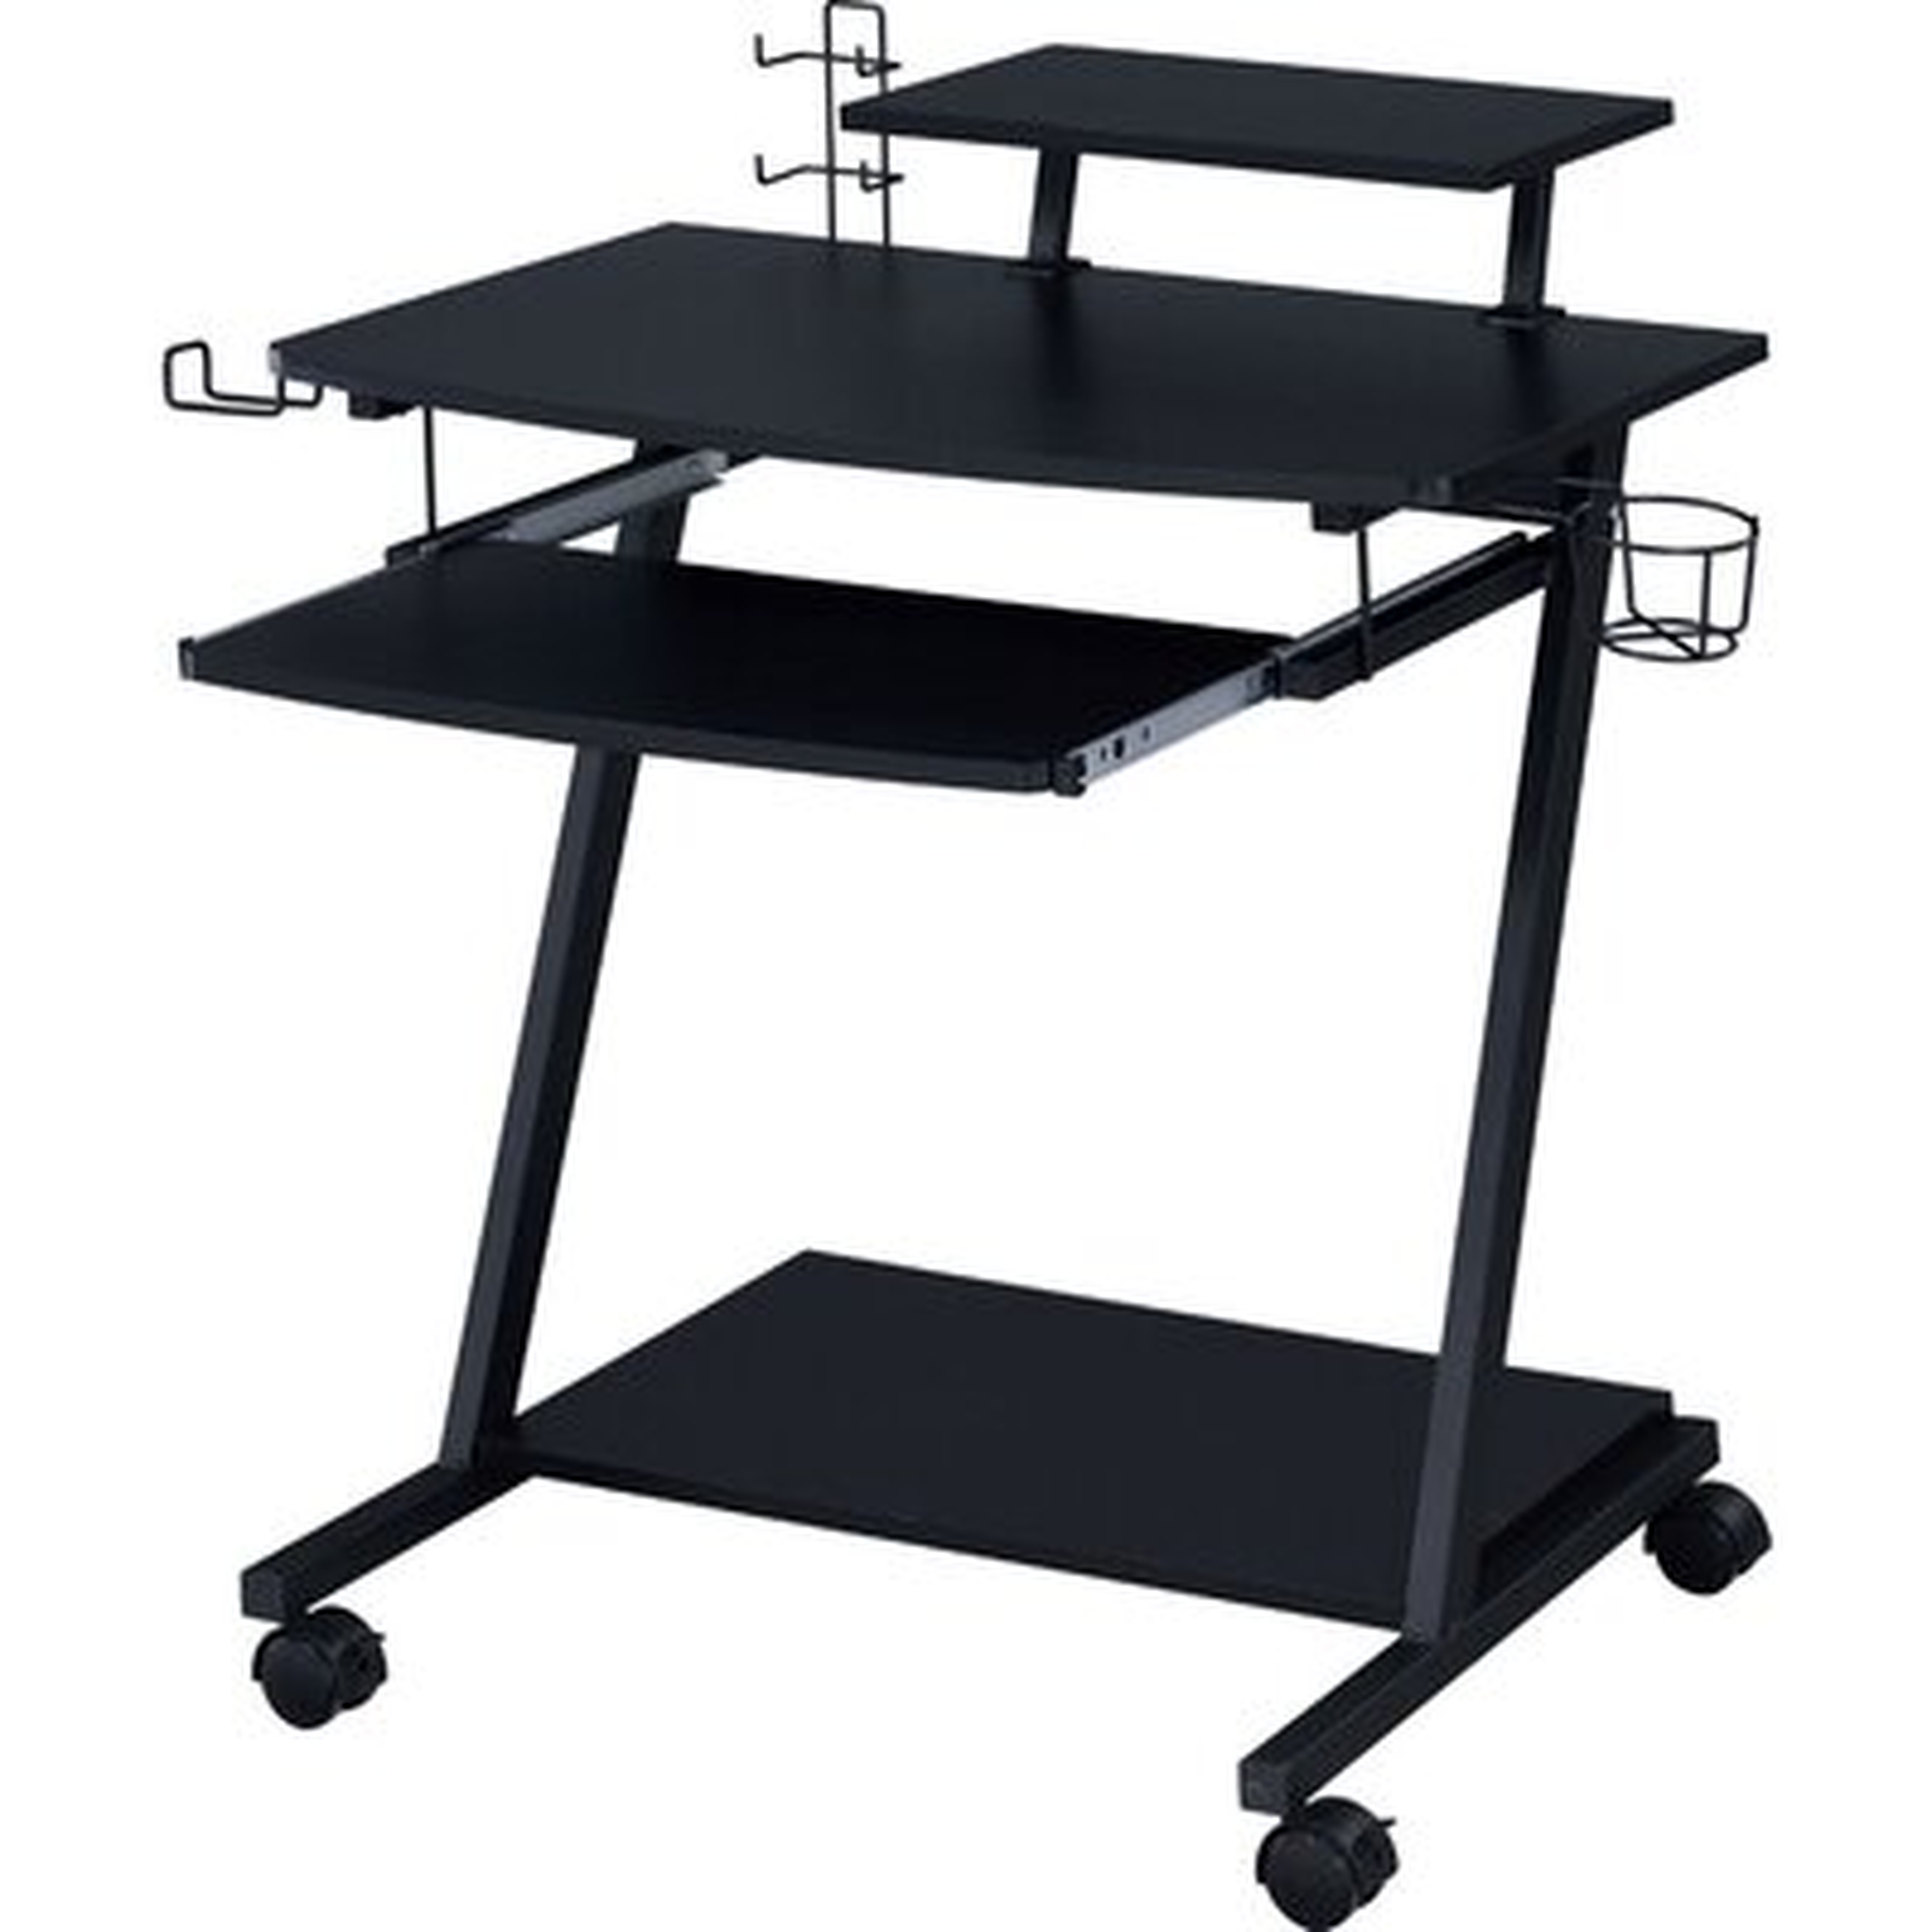 Gaming Desk With Metal Frame And Casters, Black - Wayfair